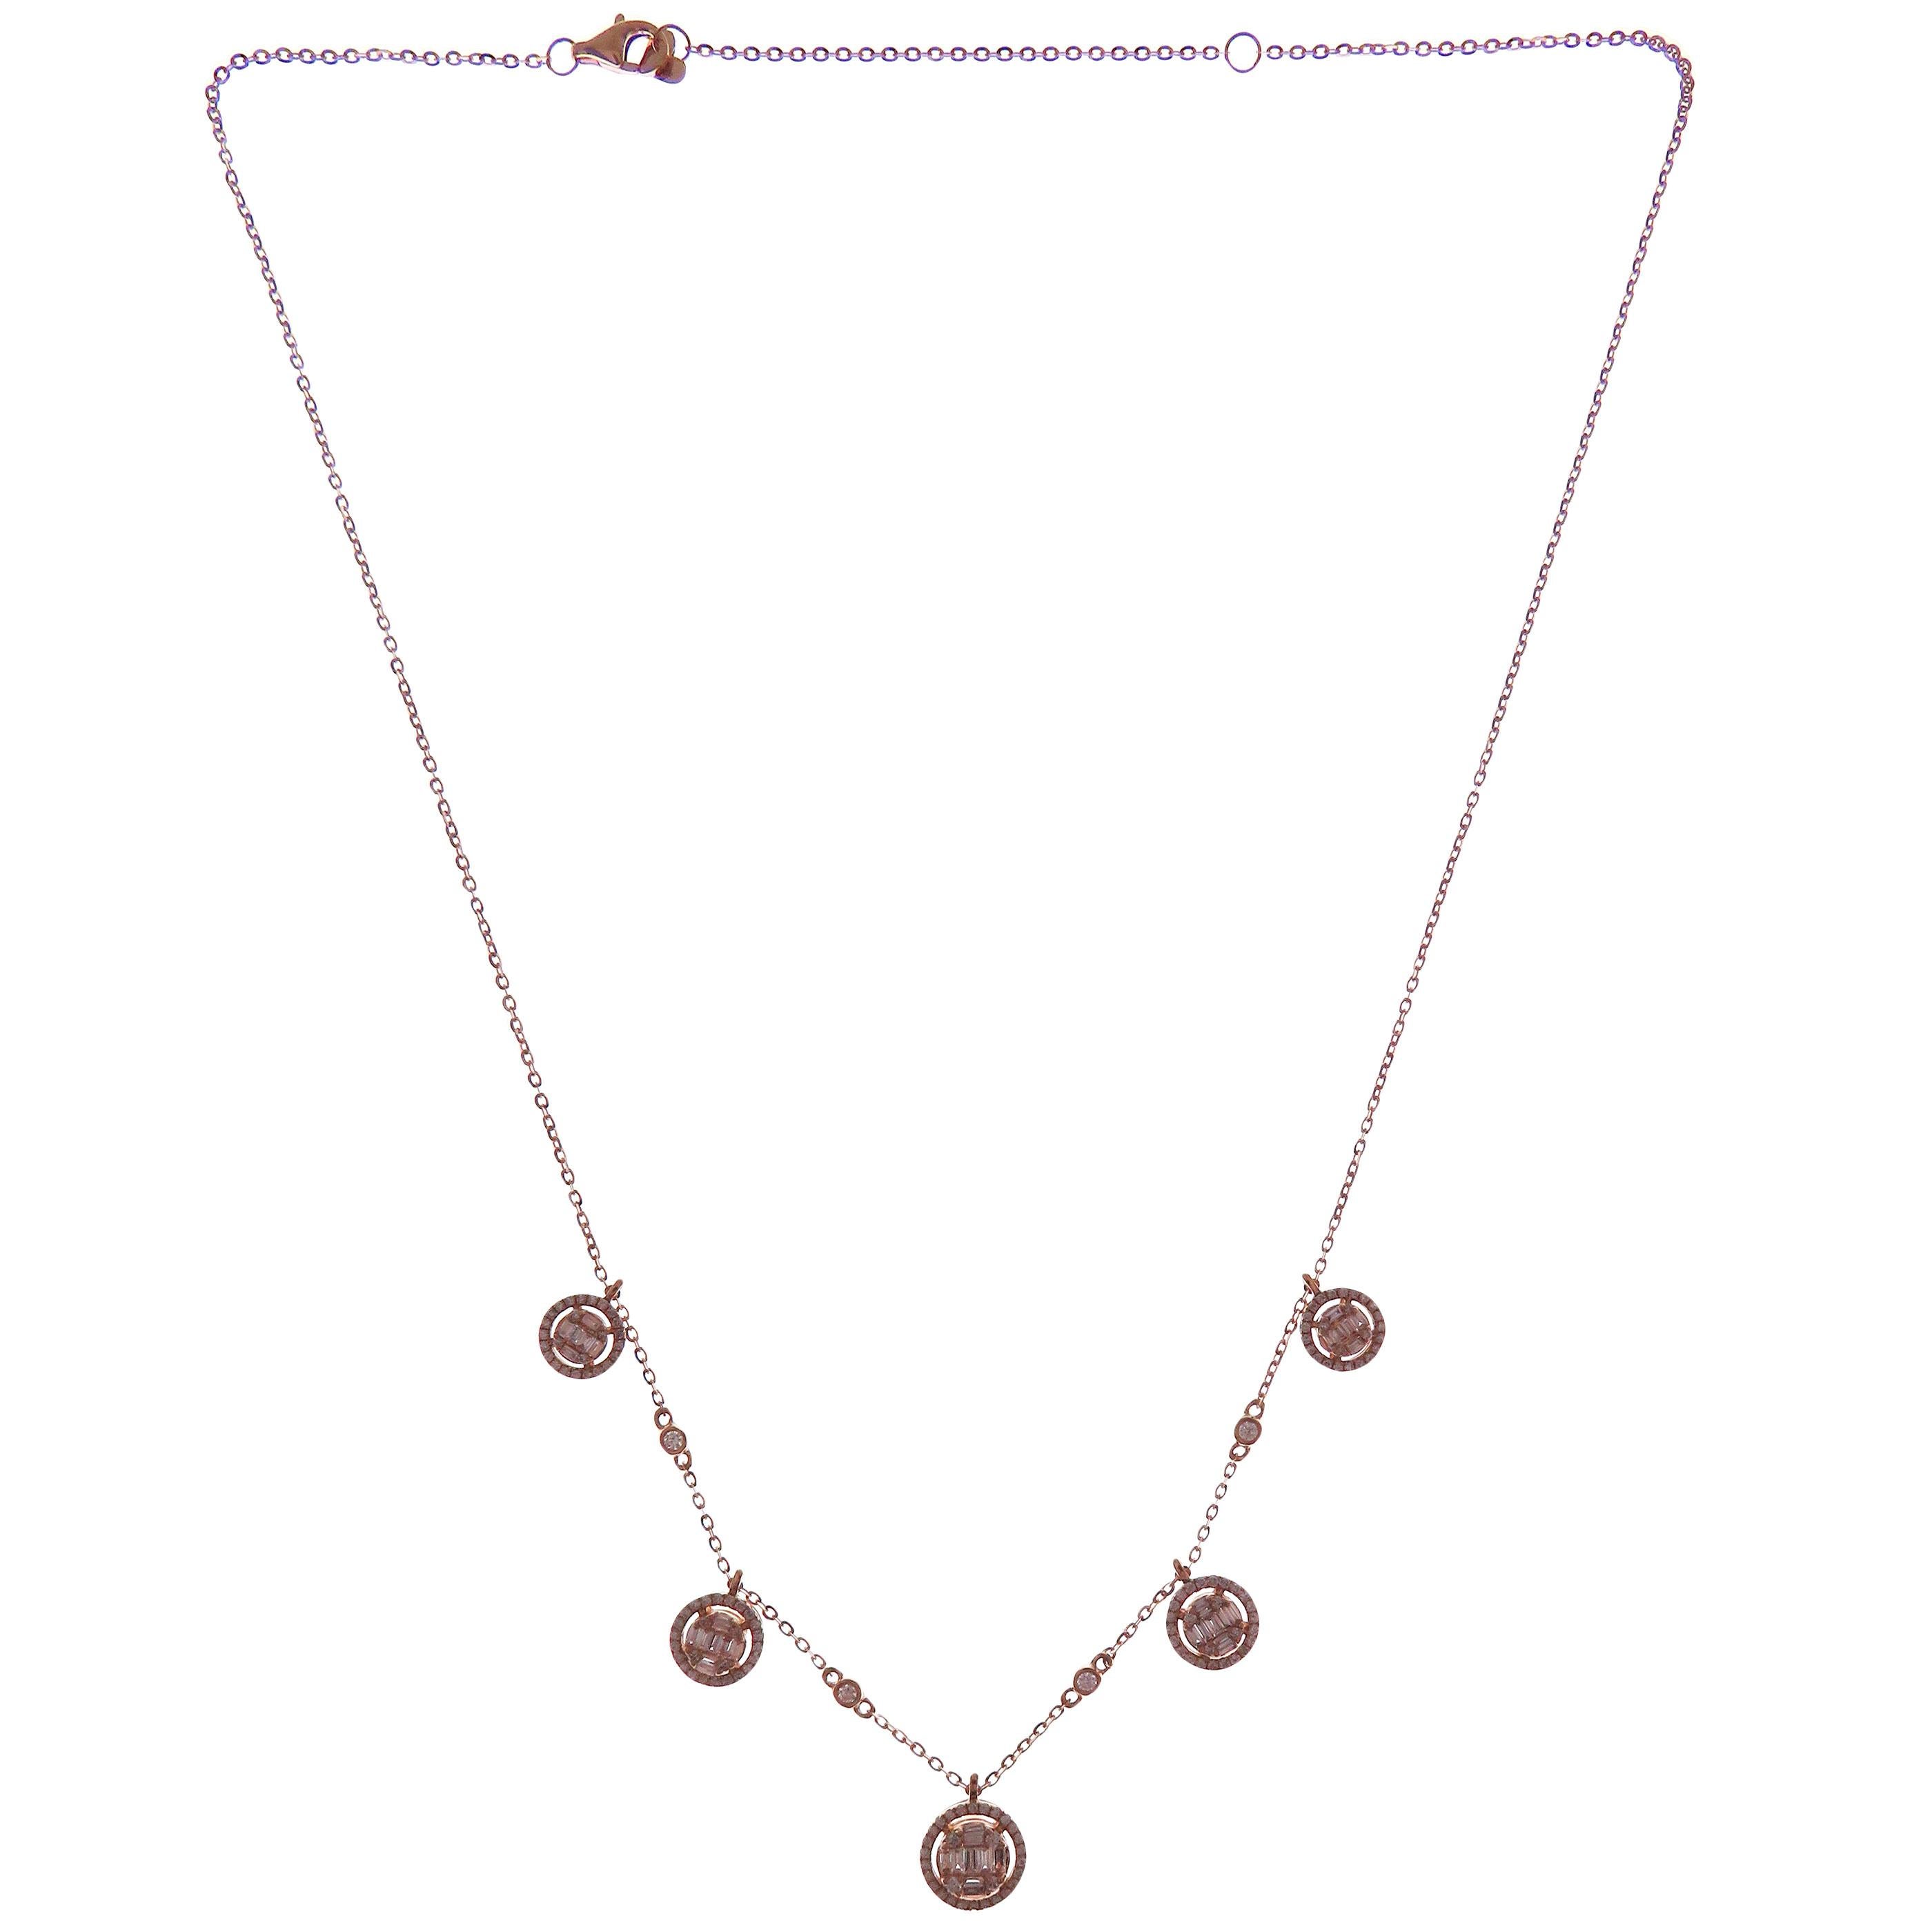 This delicate necklace is crafted in 18-karat rose gold, weighing approximately 1.00 total carats of SI-H Quality white diamonds. 
18-karat white gold and yellow gold are also available upon request 

Necklace is 16